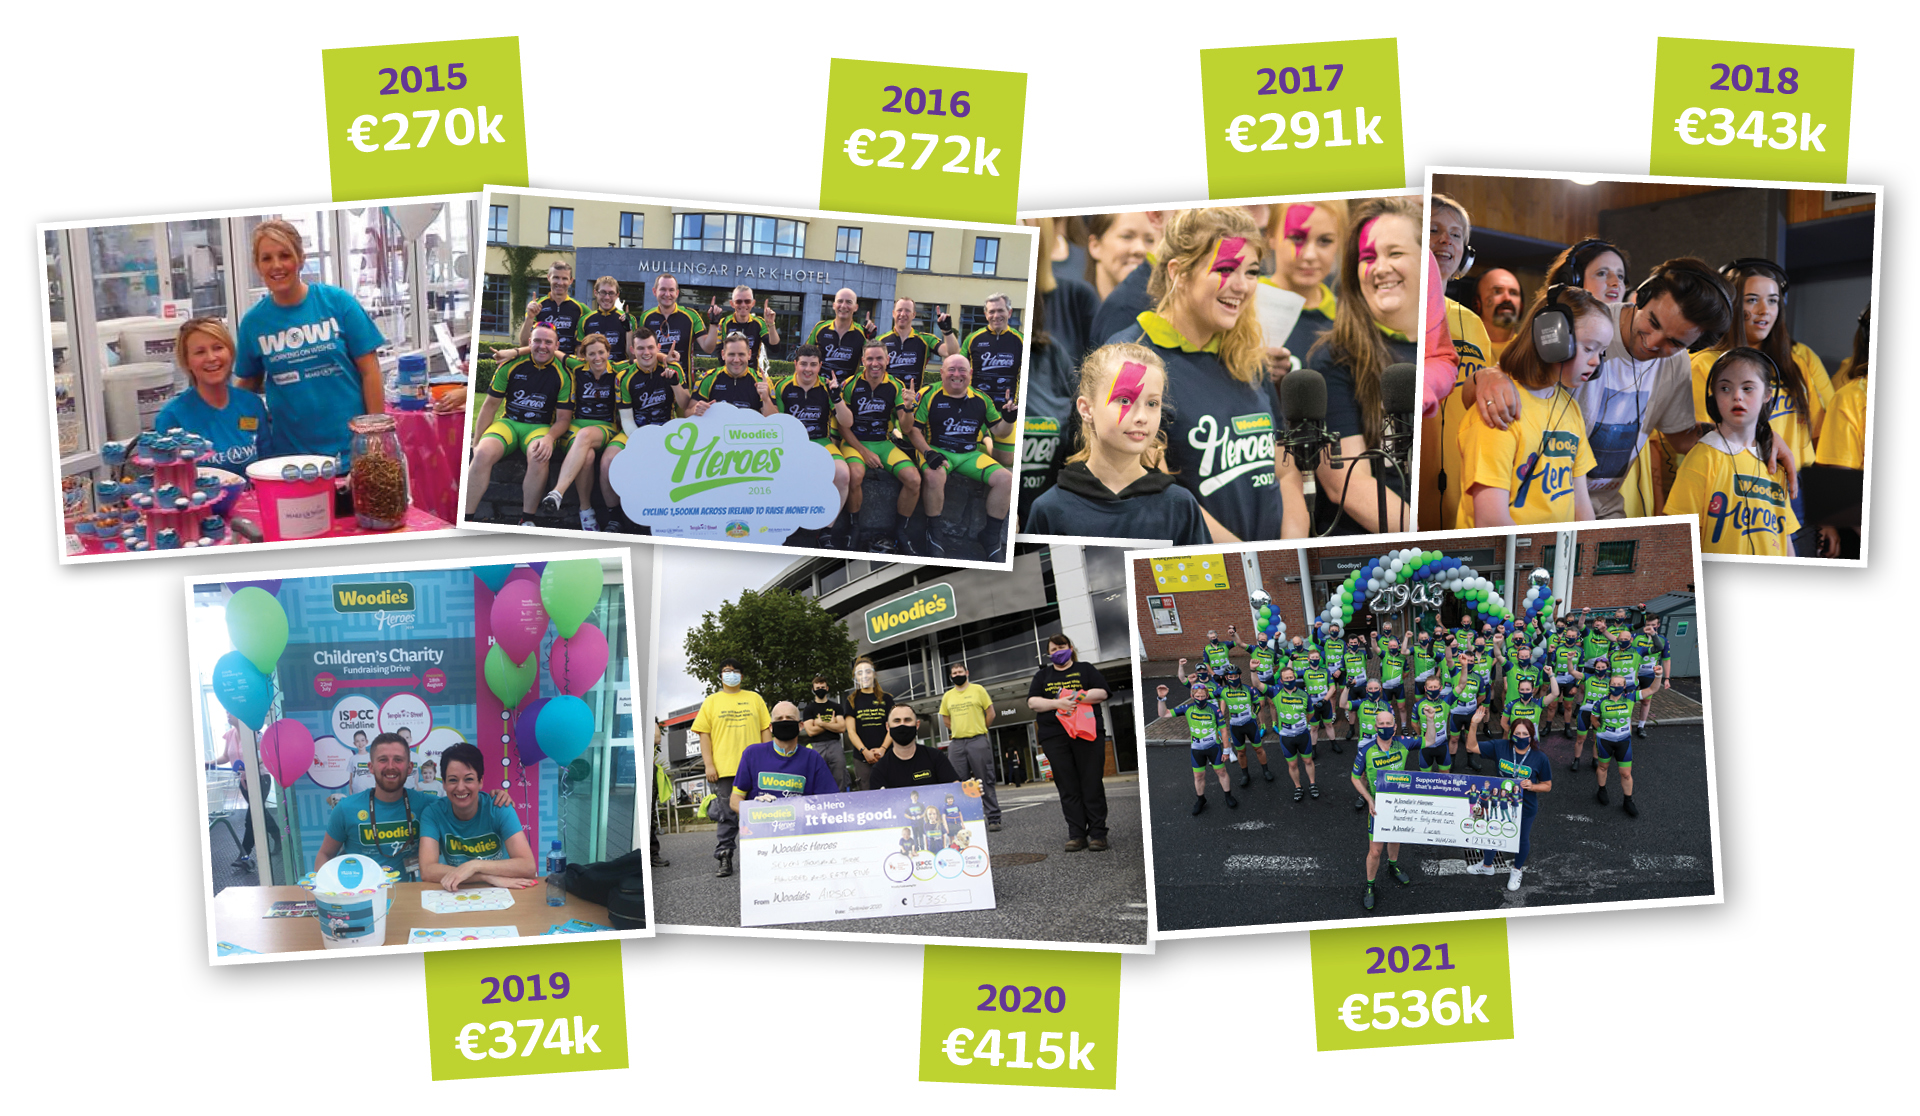 On display: Pictures of our colleagues and supporters celebrating the money we have raised over the years: 2015: 270,000 2016; 272,000 2017; 291,000 2018; 343,000 2019; 374,000 2020; 415,000 2021; 536,000